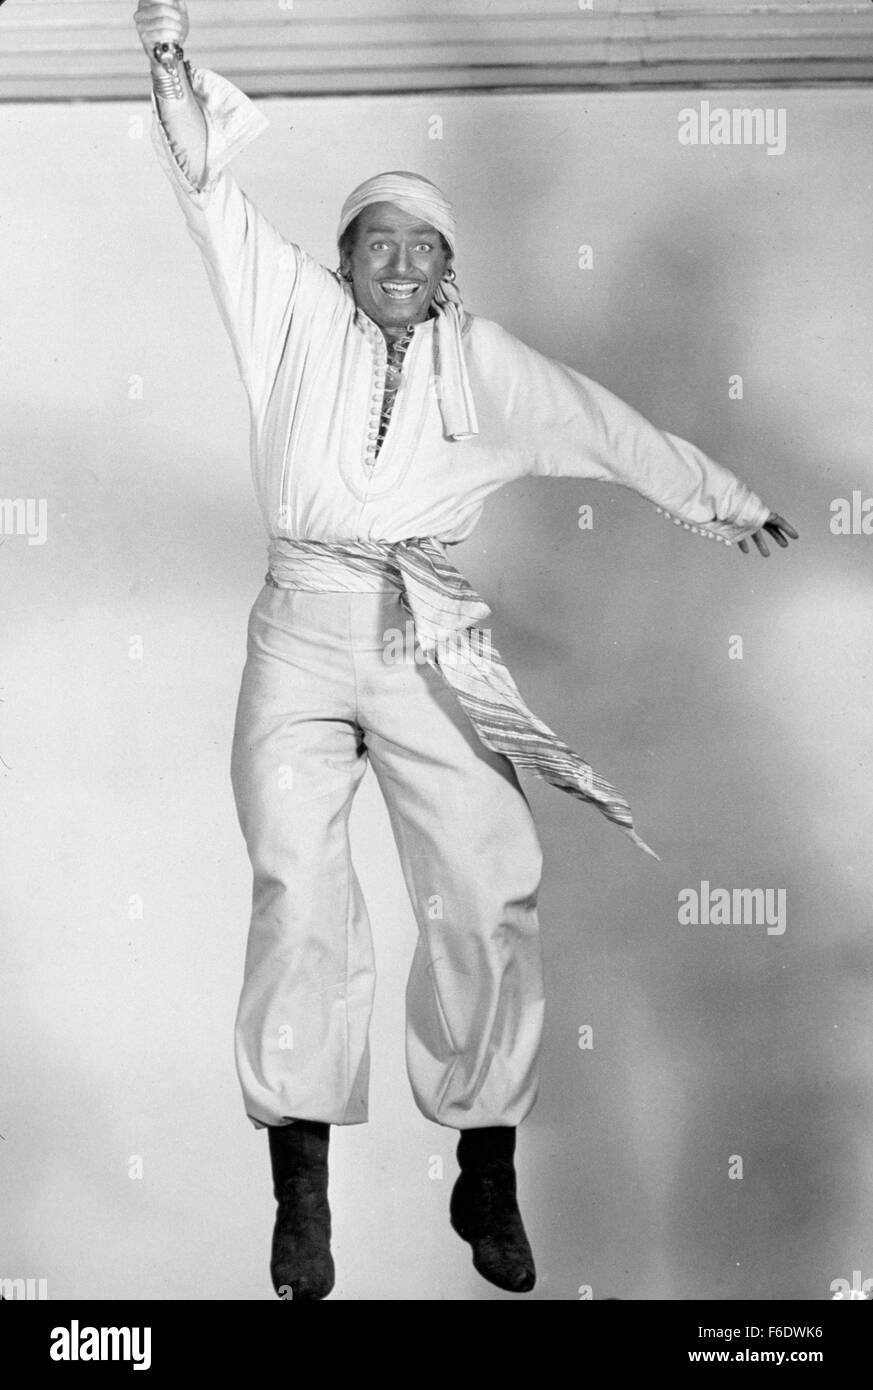 RELEASE DATE: Jan 17, 1947. MOVIE TITLE: Sinbad the Sailor. STUDIO: RKO Radio Pictures. PLOT: Sinbad is a story teller who weaves great adventures about - himself. Whether they are true or not, no one knows. For this is the story of the eight adventures of Sinbad - as told by Sinbad. A ship saved by Sinbad and Sabu. A treasure map to the treasure of Alexander the Great, which mysteriously disappears from the ship. The beautiful Shireen - the woman who has stolen the heart of Sinbad. The evil Amir who wants the treasure for himself to own the world. The deadly Melik, who will stop at nothing an Stock Photo